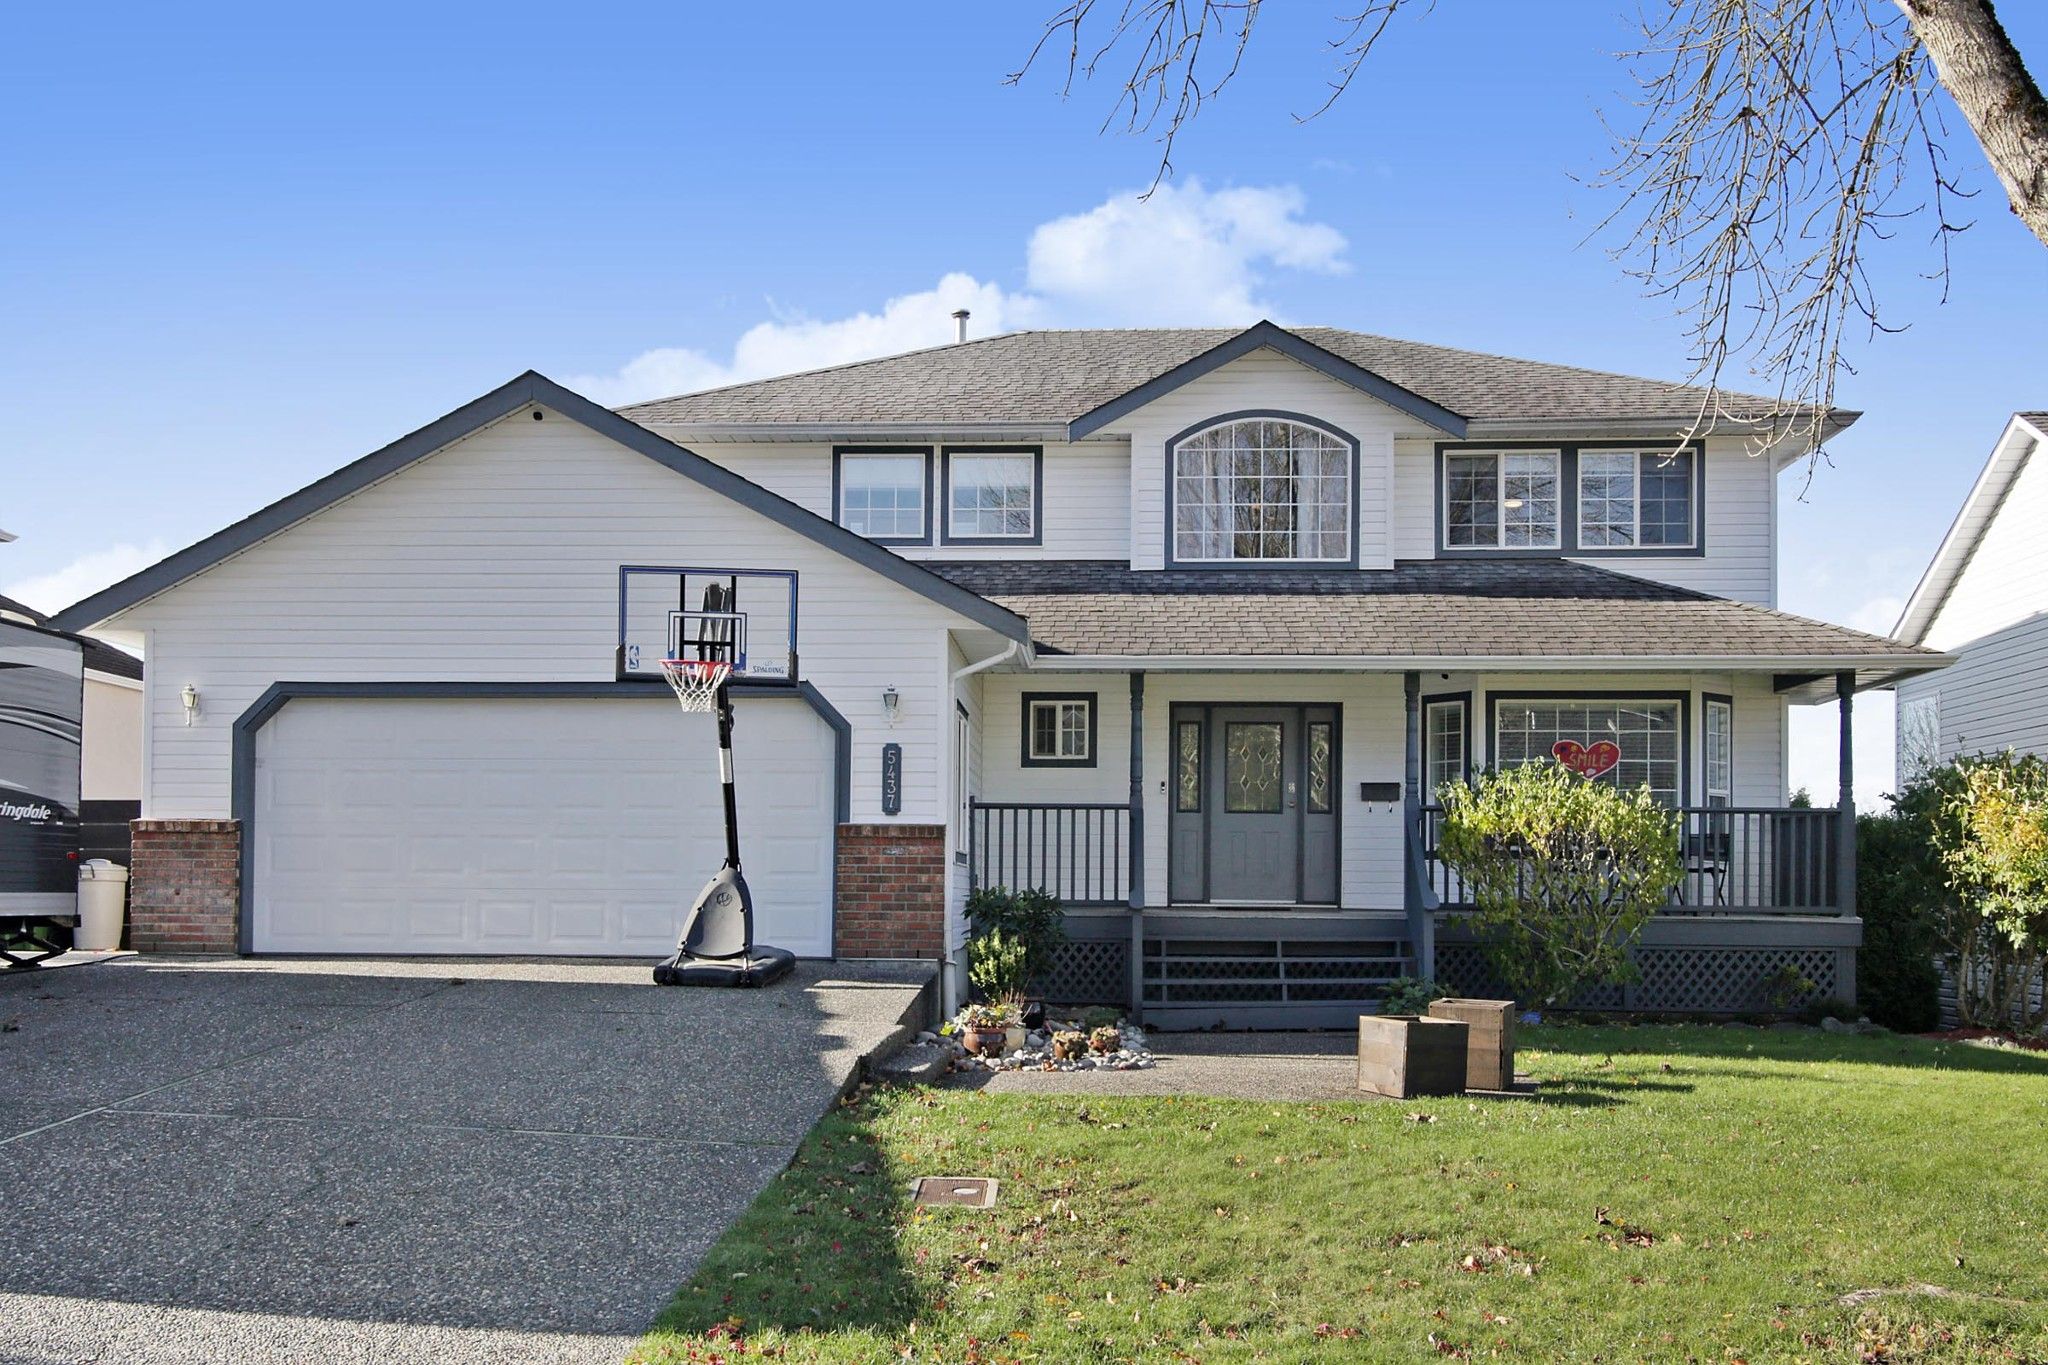 I have sold a property at 5437 HIGHROAD CRES in Chilliwack
